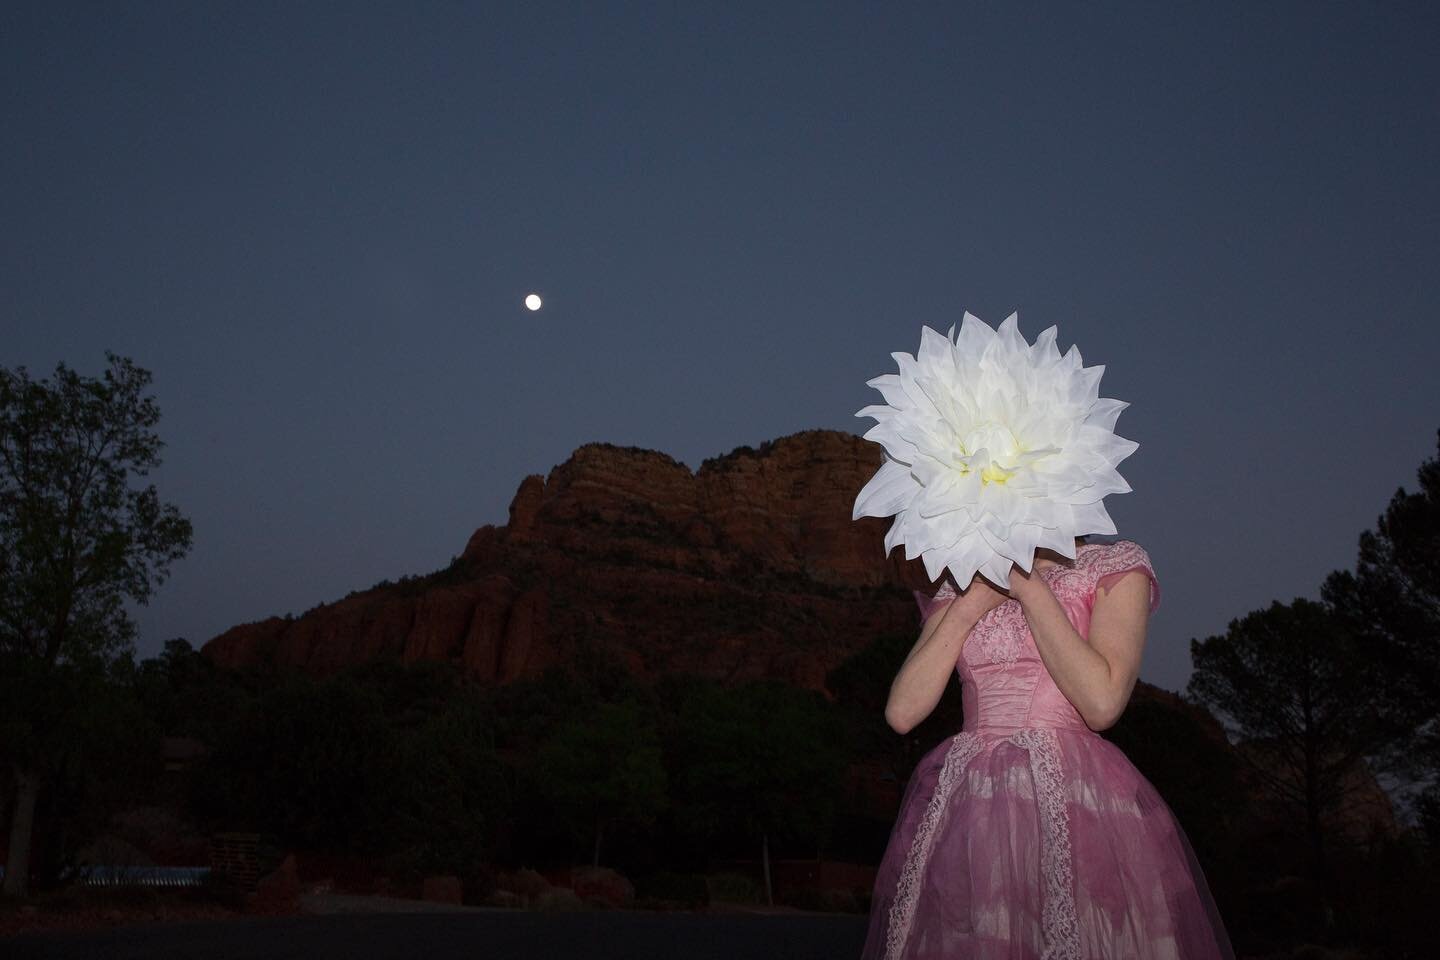 Flowers grow strange 
these nights 
under the full moon. 

From our road trip to the Grand Canyon with the incomparable @larabug9 

#surrealportrait #creativeportrait #portrait #artportrait #bigsky #fullmoon #grandcanyon #bigflowers #brooklynphotogra